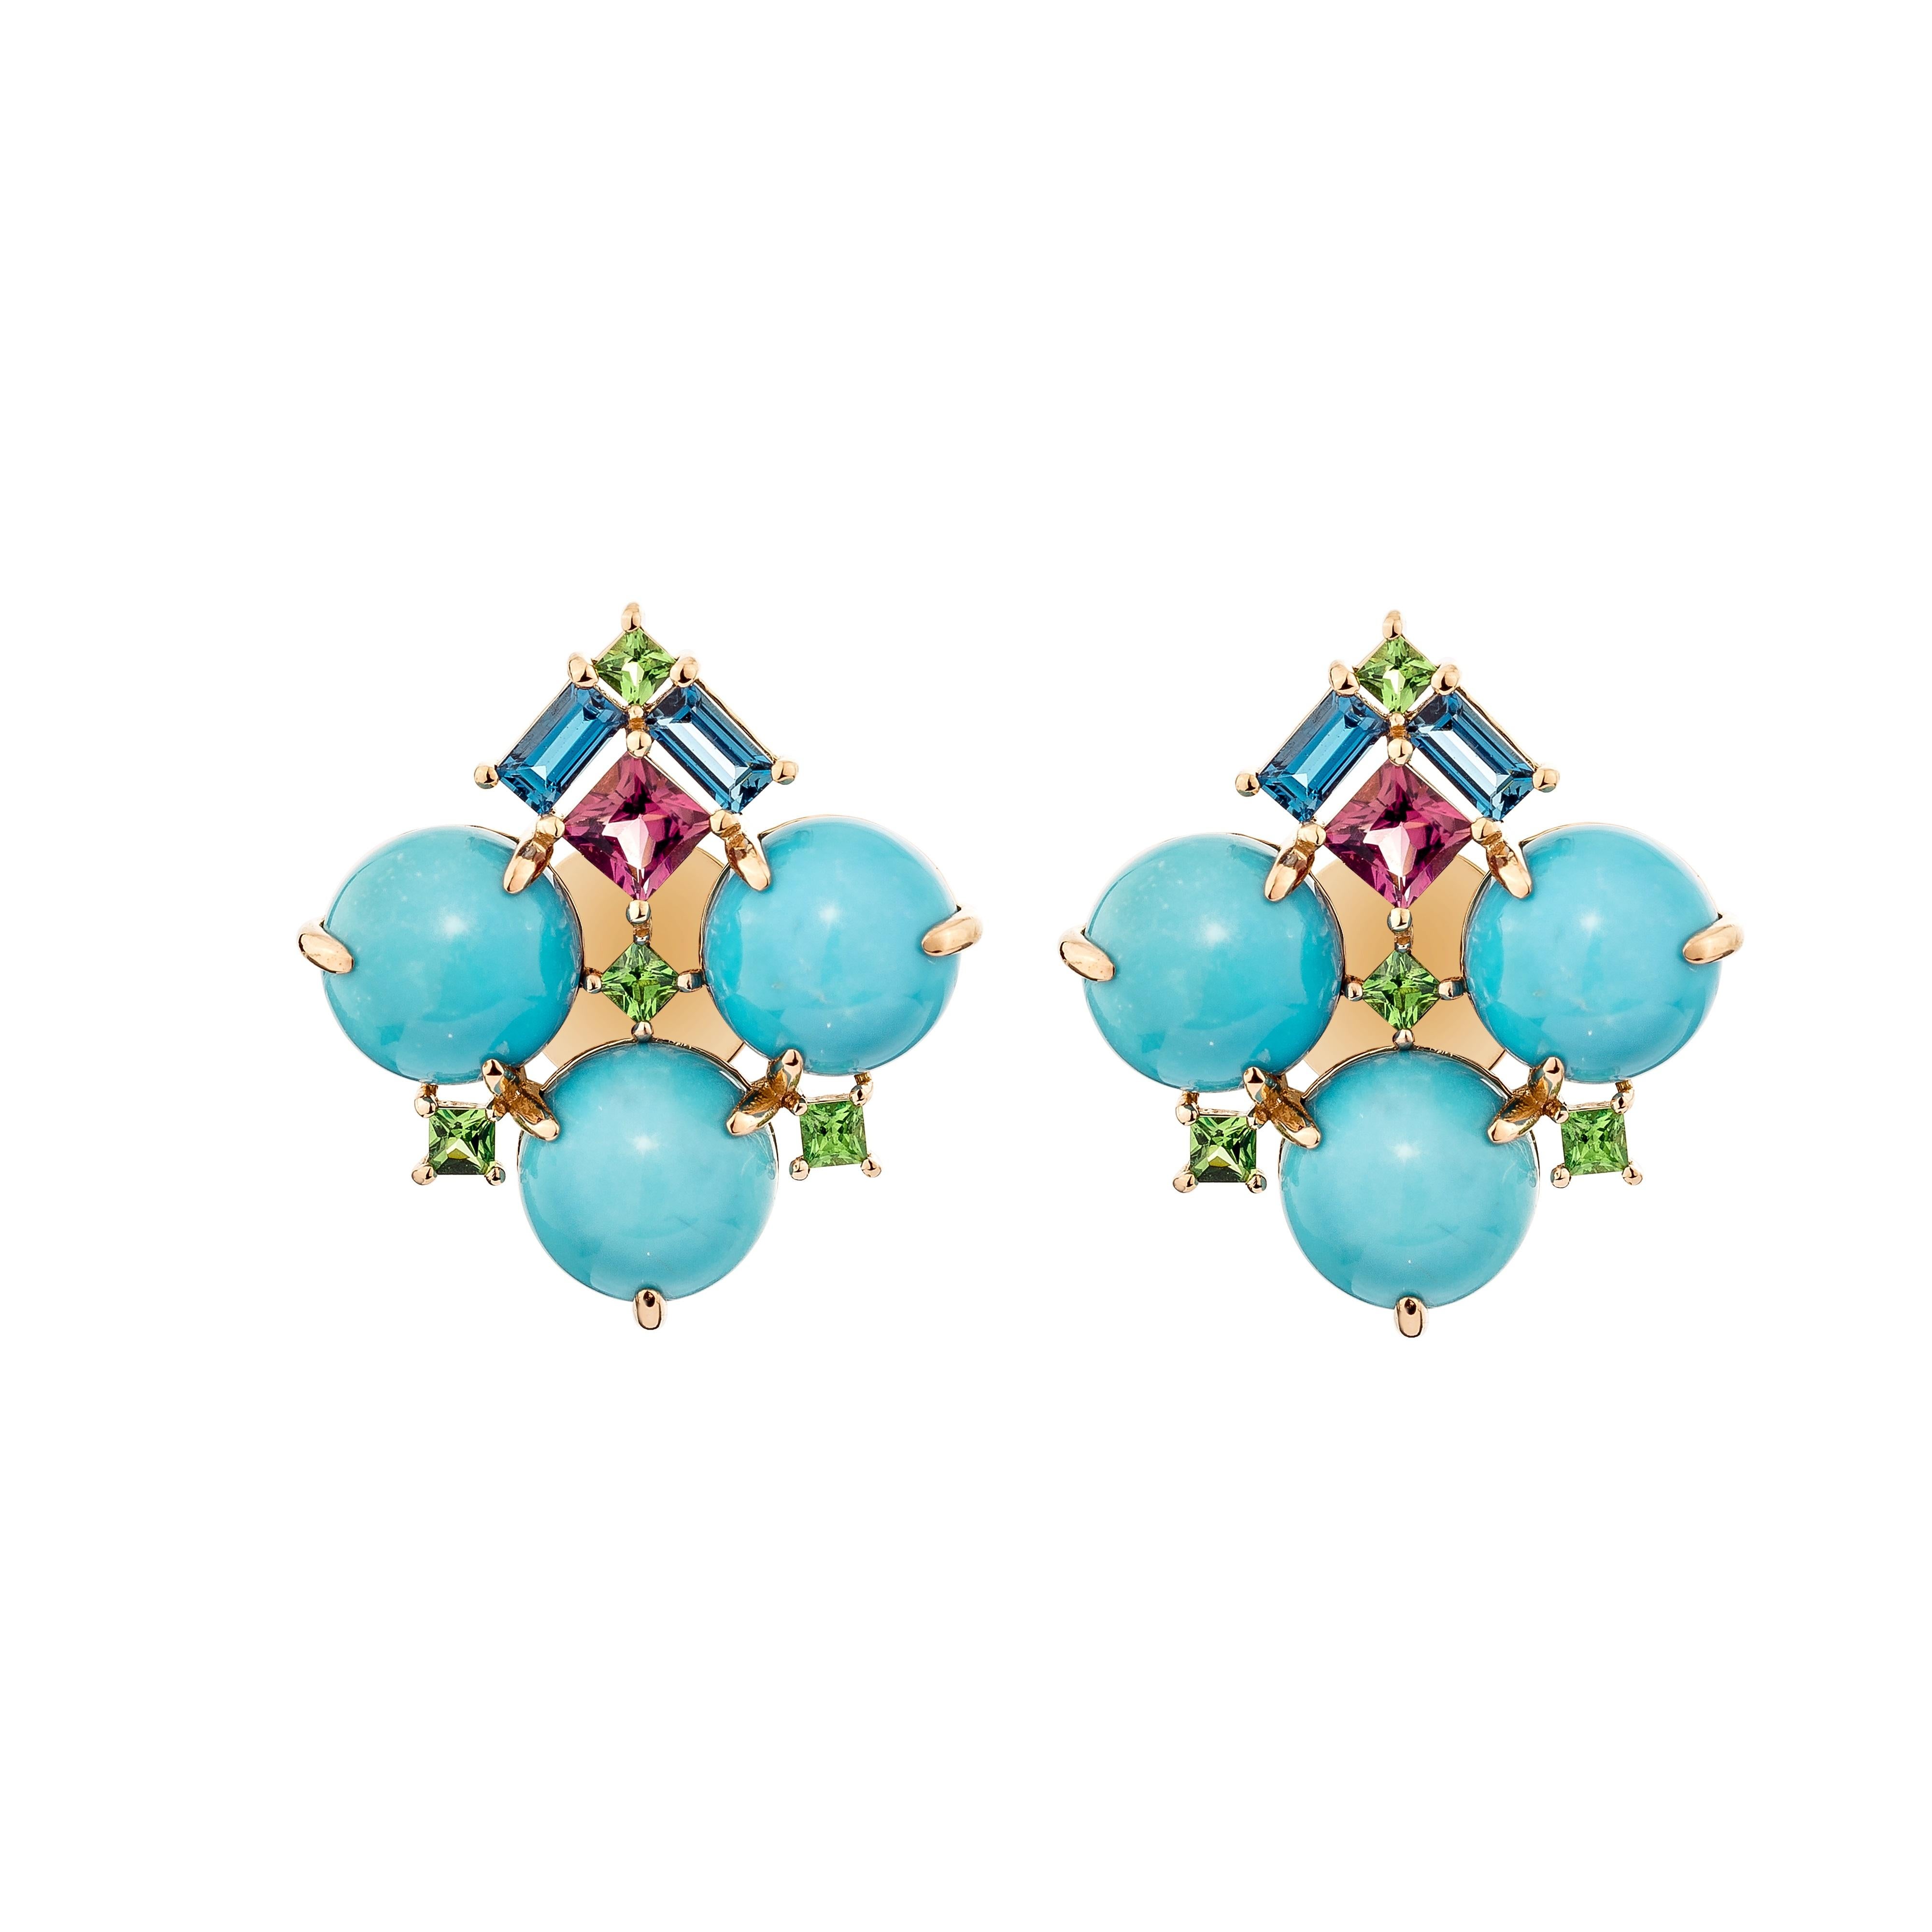 Contemporary 11.65 Carat Turquoise Stud Earring in 18Karat Rose Gold with Multi gemstone. For Sale